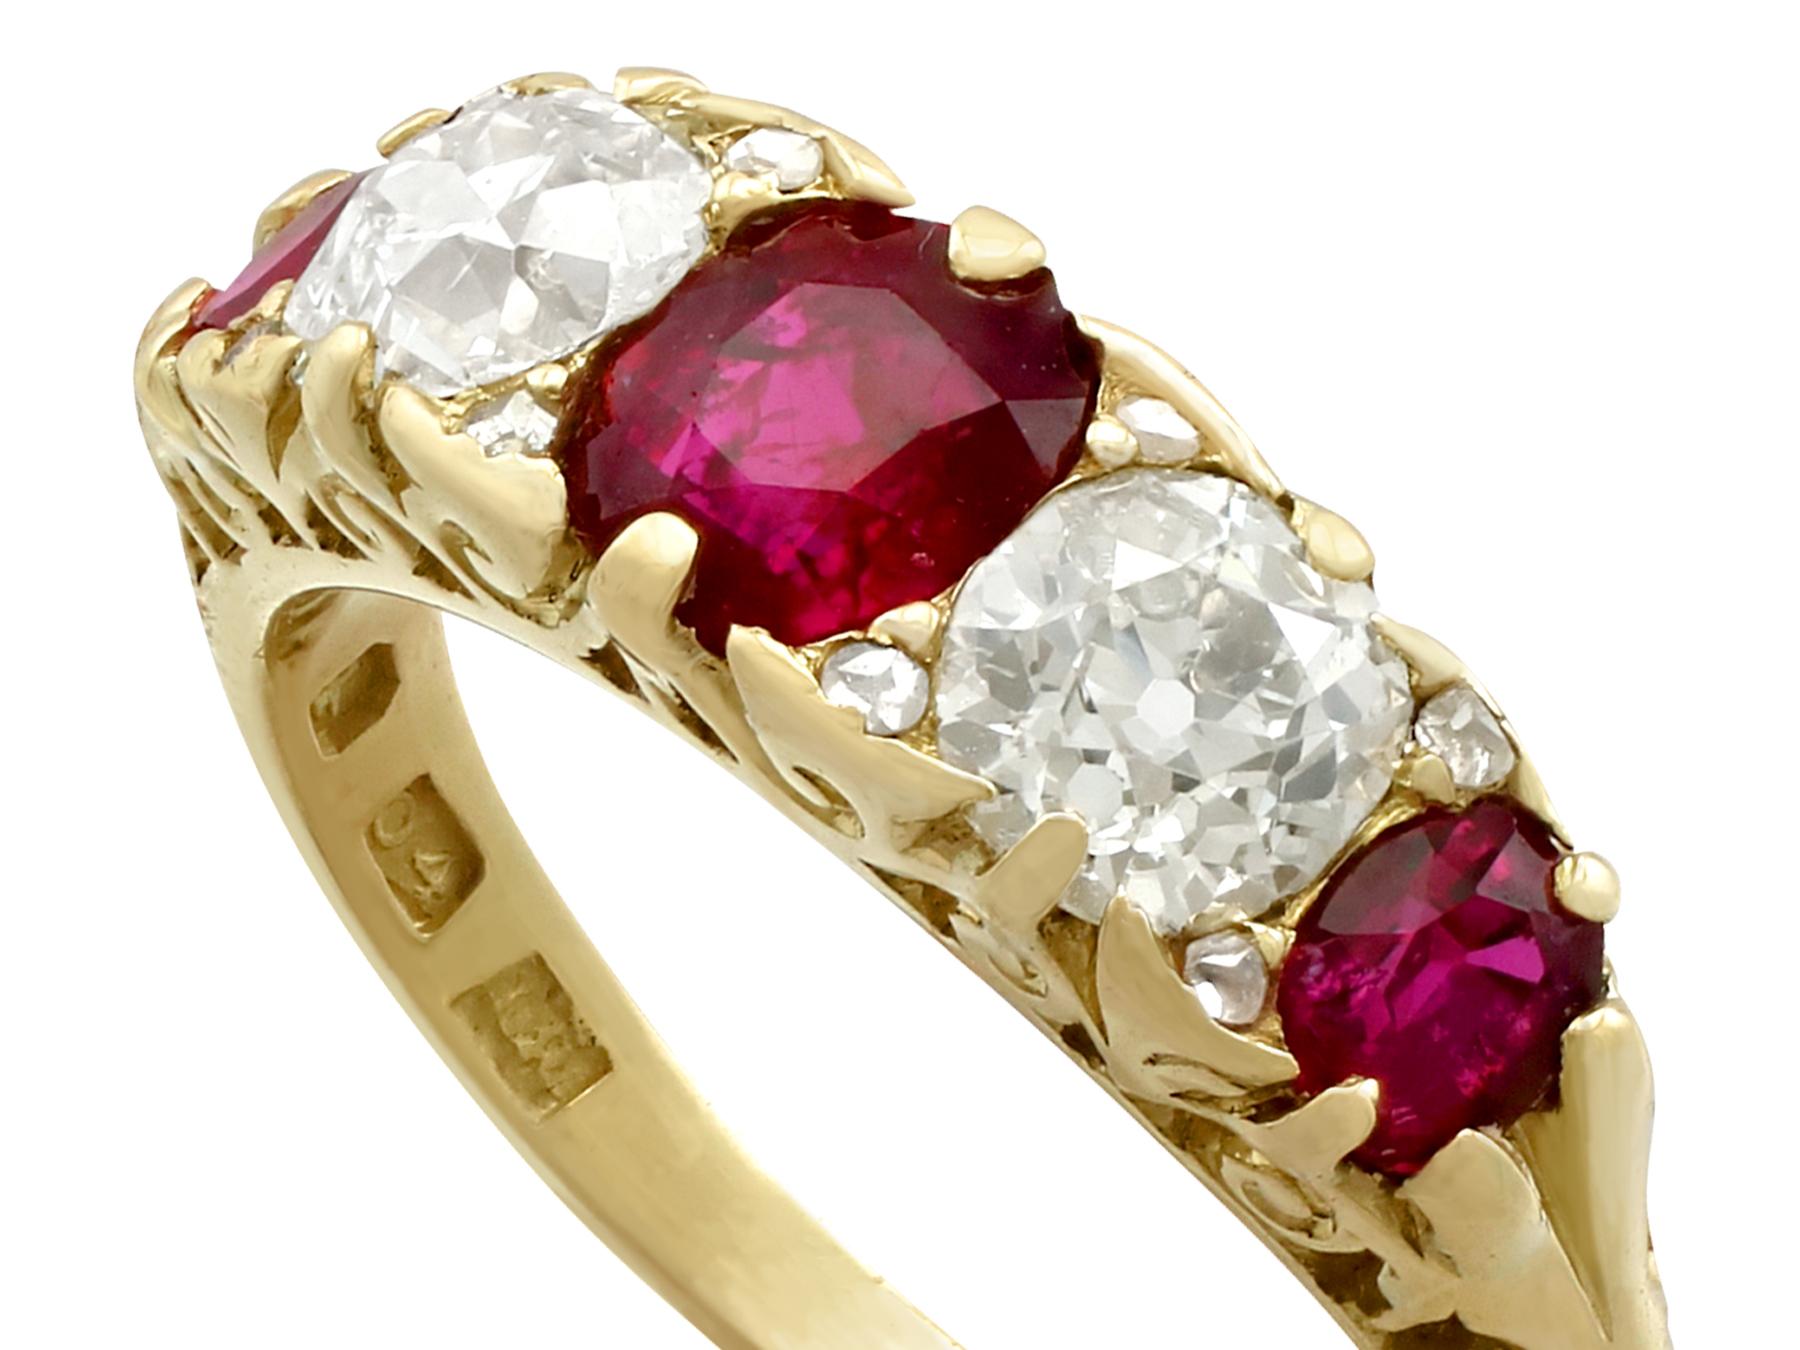 Oval Cut Antique 1.19 Carat Ruby and 1.15 Carat Diamond Five-Stone Dress Ring